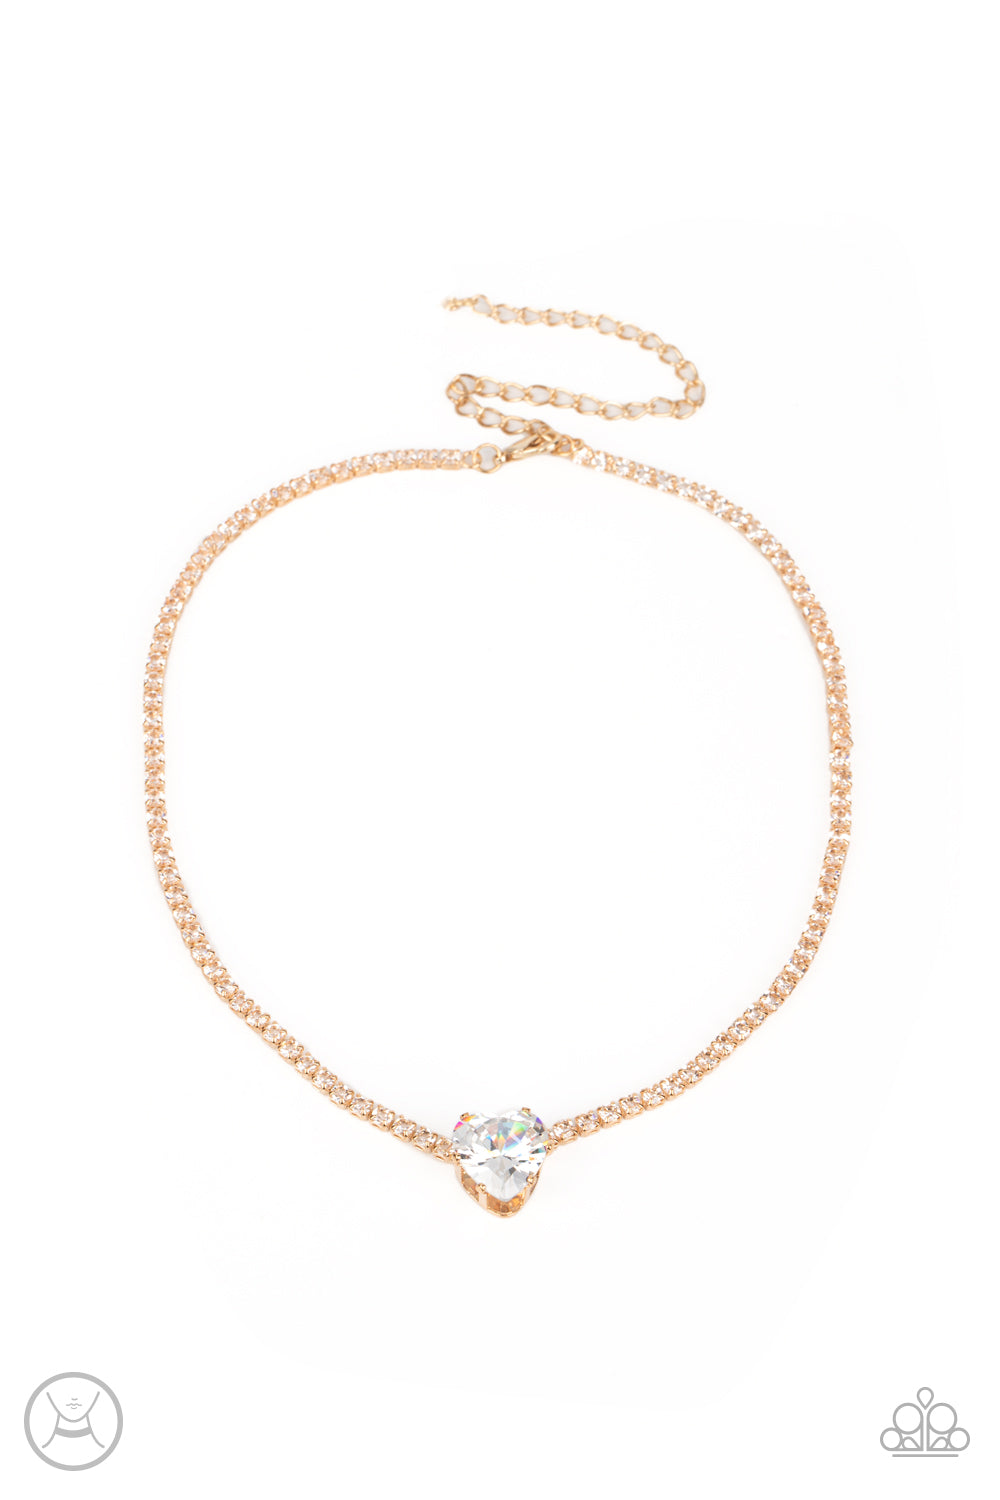 Paparazzi Accessories Flirty Fiancé - Gold An oversized white heart-shaped gem, set in an airy, pronged gold fitting, glitters at the center of a blinding row of dainty, glassy white rhinestones set in square gold fittings, resulting in a flirtatious spar